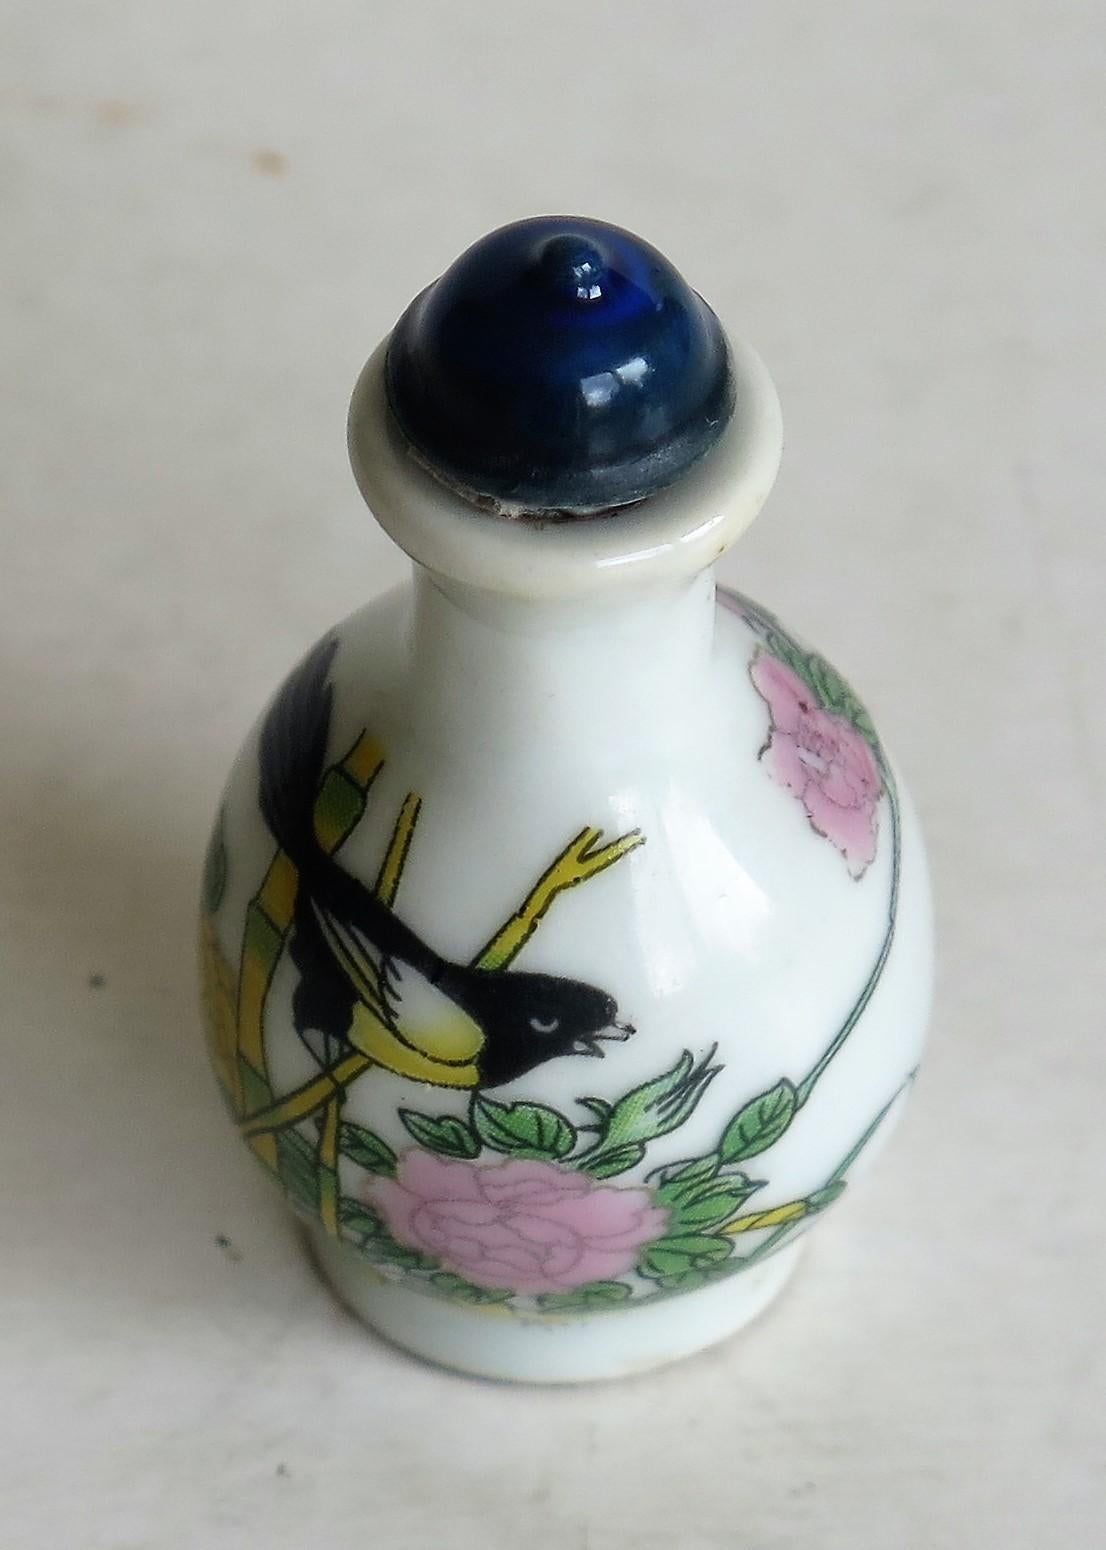 Qing Chinese Porcelain Snuff Bottle, Hand-Painted Birds and Flowers, circa 1930